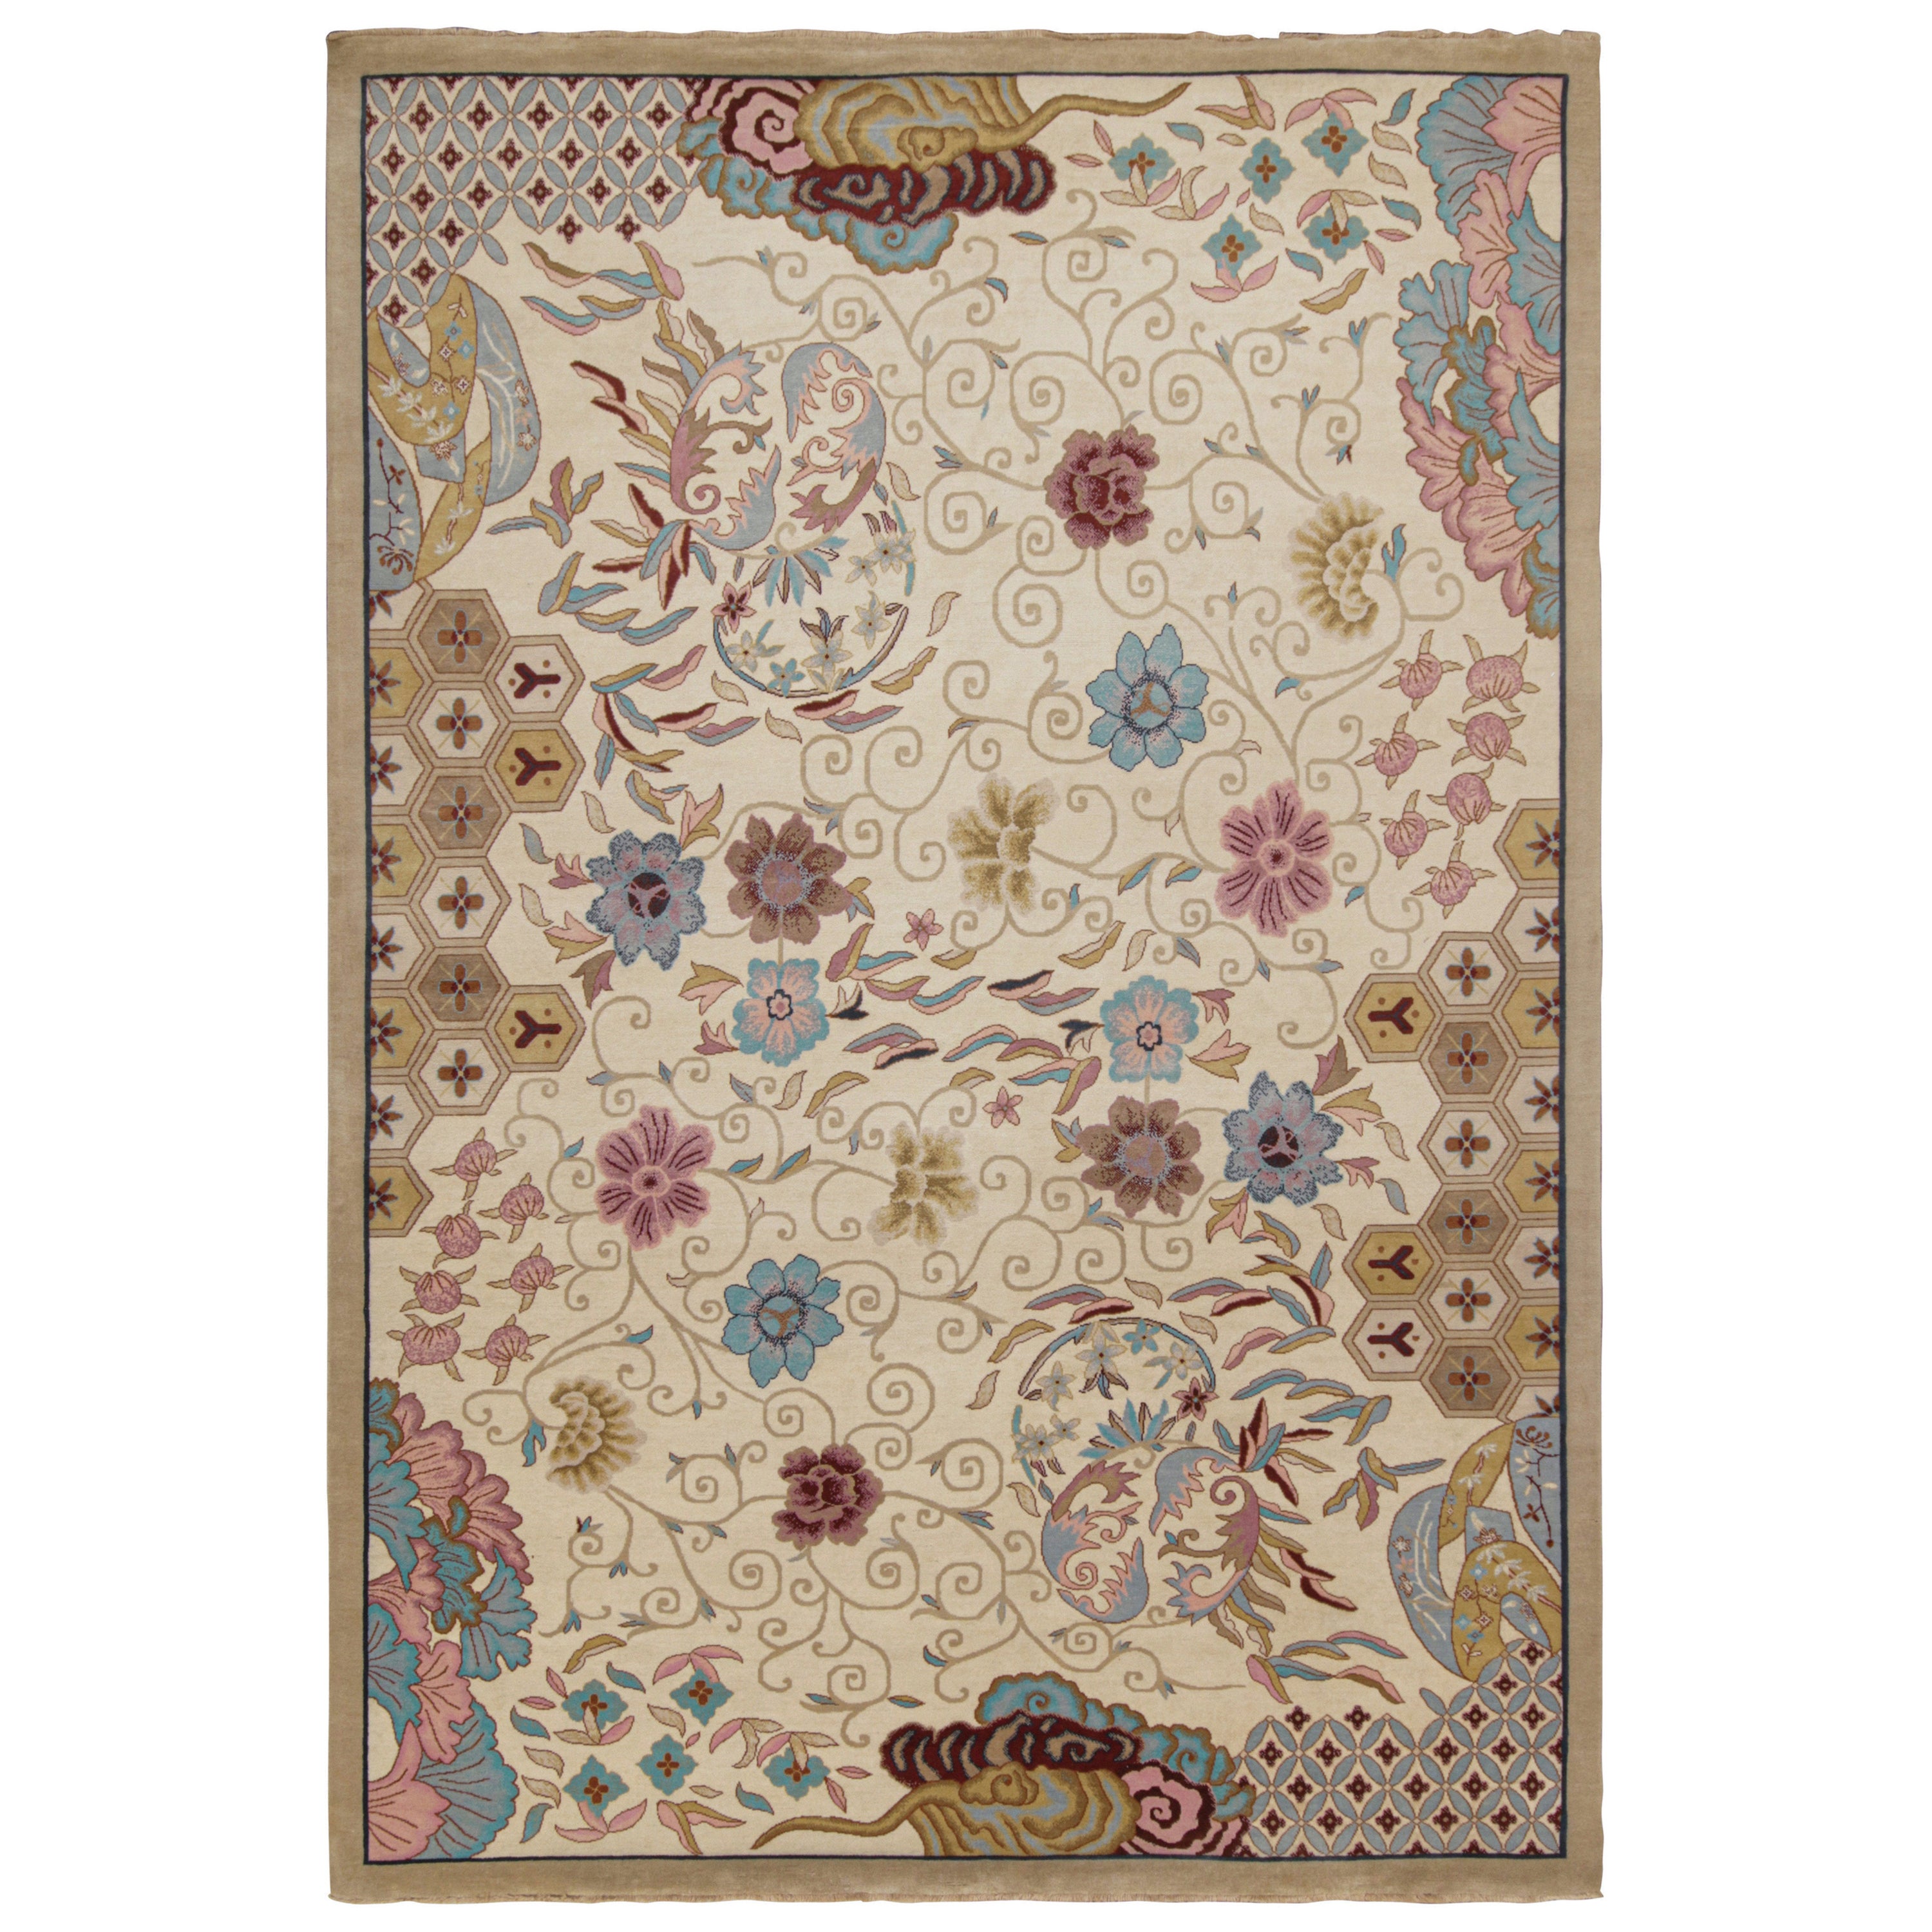 Rug & Kilim’s Chinese Art Deco Style Rug in Beige-Brown with Floral Patterns For Sale